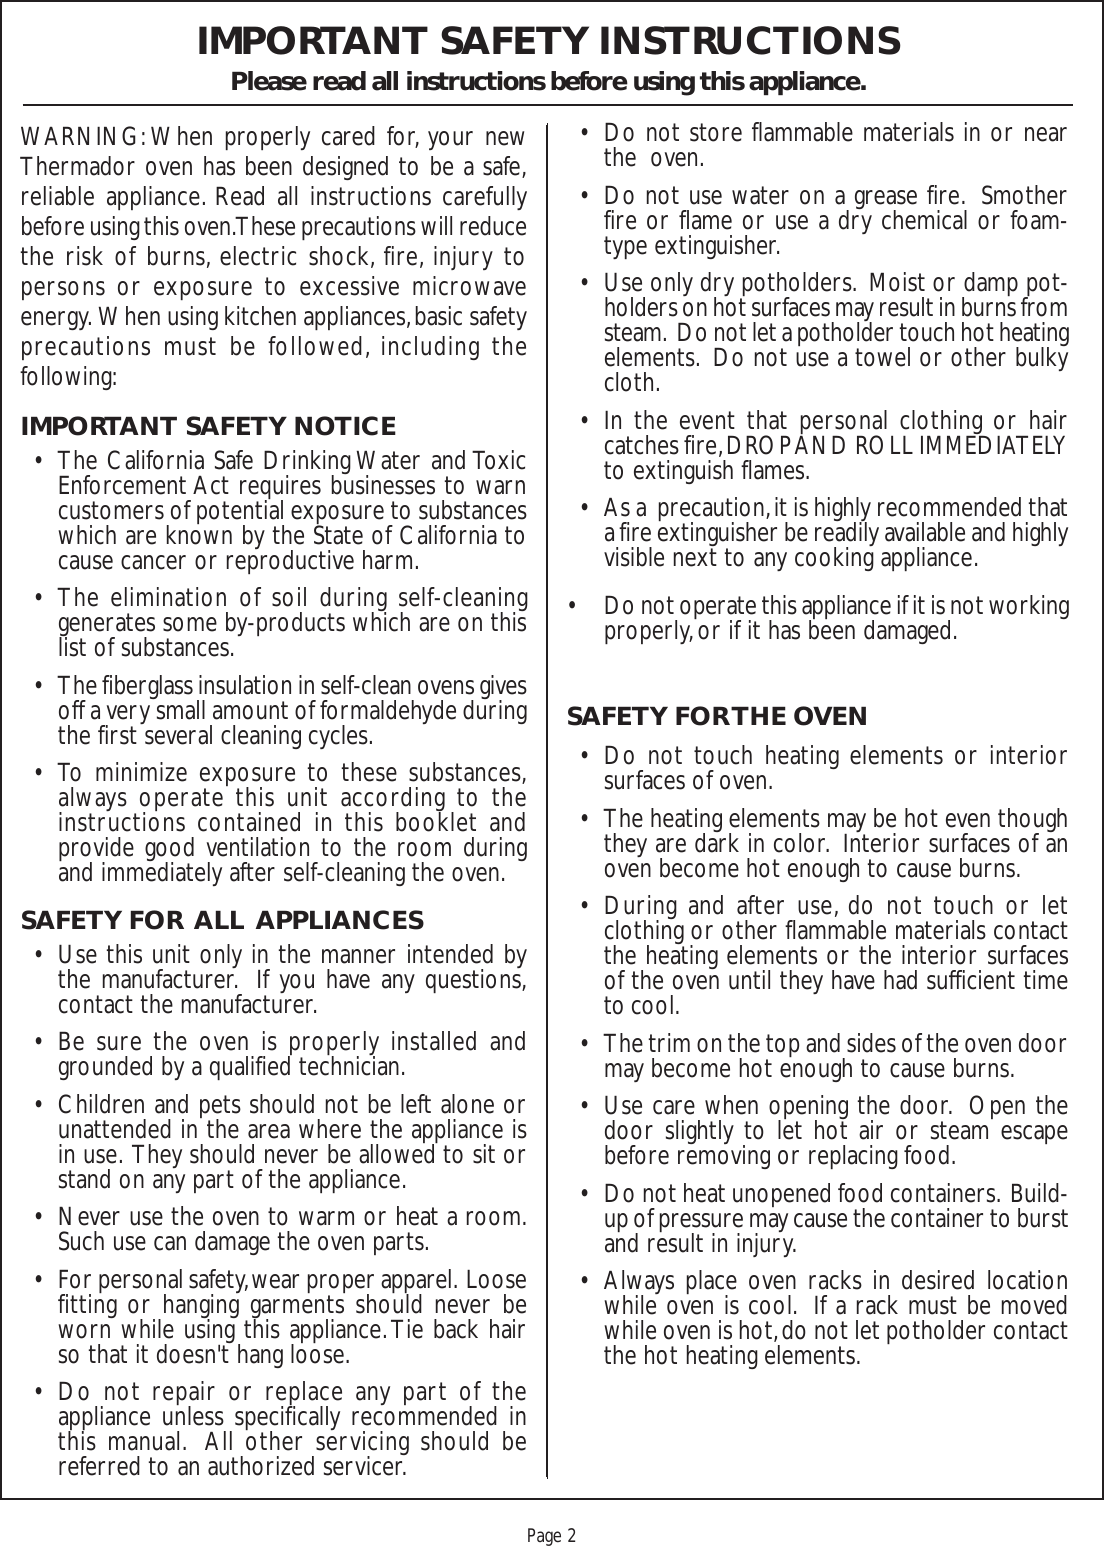 Proof 9-21-99Page 2IMPORTANT SAFETY INSTRUCTIONSPlease read all instructions before using this appliance.WARNING: When properly cared for, your newThermador oven has been designed to be a safe,reliable appliance. Read all instructions carefullybefore using this oven. These precautions will reducethe risk of burns, electric shock, fire, injury topersons or exposure to excessive microwaveenergy.  When using kitchen appliances, basic safetyprecautions must be followed, including thefollowing:IMPORTANT SAFETY NOTICE• The California Safe Drinking Water and ToxicEnforcement Act requires businesses to warncustomers of potential exposure to substanceswhich are known by the State of California tocause cancer or reproductive harm.• The elimination of soil during self-cleaninggenerates some by-products which are on thislist of substances.• The fiberglass insulation in self-clean ovens givesoff a very small amount of formaldehyde duringthe first several cleaning cycles.• To minimize exposure to these substances,always operate this unit according to theinstructions contained in this booklet andprovide good ventilation to the room duringand immediately after self-cleaning the oven.SAFETY FOR  ALL  APPLIANCES• Use this unit only in the manner intended bythe manufacturer.  If you have any questions,contact the manufacturer.• Be sure the oven is properly installed andgrounded by a qualified technician.• Children and pets should not be left alone orunattended in the area where the appliance isin use.  They should never be allowed to sit orstand on any part of the appliance.• Never use the oven to warm or heat a room.Such use can damage the oven parts.• For personal safety, wear proper apparel.  Loosefitting or hanging garments should never beworn while using this appliance. Tie back hairso that it doesn&apos;t hang loose.• Do not repair or replace any part of theappliance unless specifically recommended inthis manual.  All other servicing should bereferred to an authorized servicer.• Do not store flammable materials in or nearthe  oven.• Do not use water on a grease fire.  Smotherfire or flame or use a dry chemical or foam-type extinguisher.• Use only dry potholders.  Moist or damp pot-holders on hot surfaces may result in burns fromsteam.  Do not let a potholder touch hot heatingelements.  Do not use a towel or other bulkycloth.• In the event that personal clothing or haircatches fire, DROP AND ROLL IMMEDIATELYto extinguish flames.• As a  precaution, it is highly recommended thata fire extinguisher be readily available and highlyvisible next to any cooking appliance.• Do not operate this appliance if it is not workingproperly, or if it has been damaged.SAFETY FOR THE OVEN• Do not touch heating elements or interiorsurfaces of oven.• The heating elements may be hot even thoughthey are dark in color.  Interior surfaces of anoven become hot enough to cause burns.• During and after use, do not touch or letclothing or other flammable materials contactthe heating elements or the interior surfacesof the oven until they have had sufficient timeto cool.• The trim on the top and sides of the oven doormay become hot enough to cause burns.• Use care when opening the door.  Open thedoor slightly to let hot air or steam escapebefore removing or replacing food.• Do not heat unopened food containers.  Build-up of pressure may cause the container to burstand result in injury.• Always place oven racks in desired locationwhile oven is cool.  If a rack must be movedwhile oven is hot, do not let potholder contactthe hot heating elements.